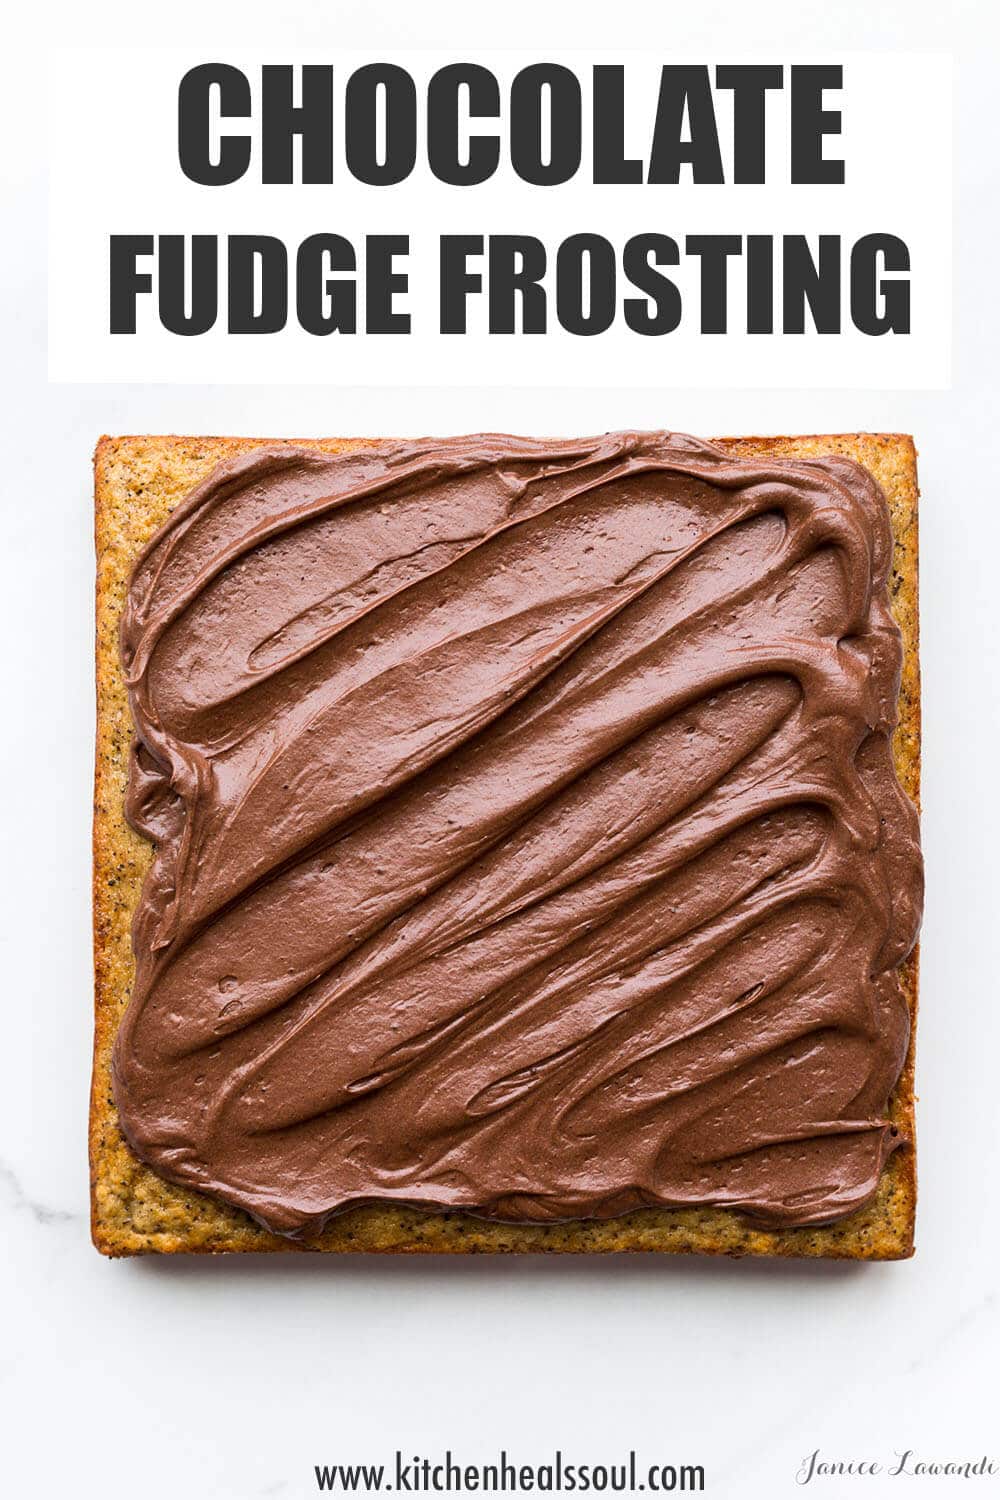 Chocolate fudge frosting on a square banana cake.